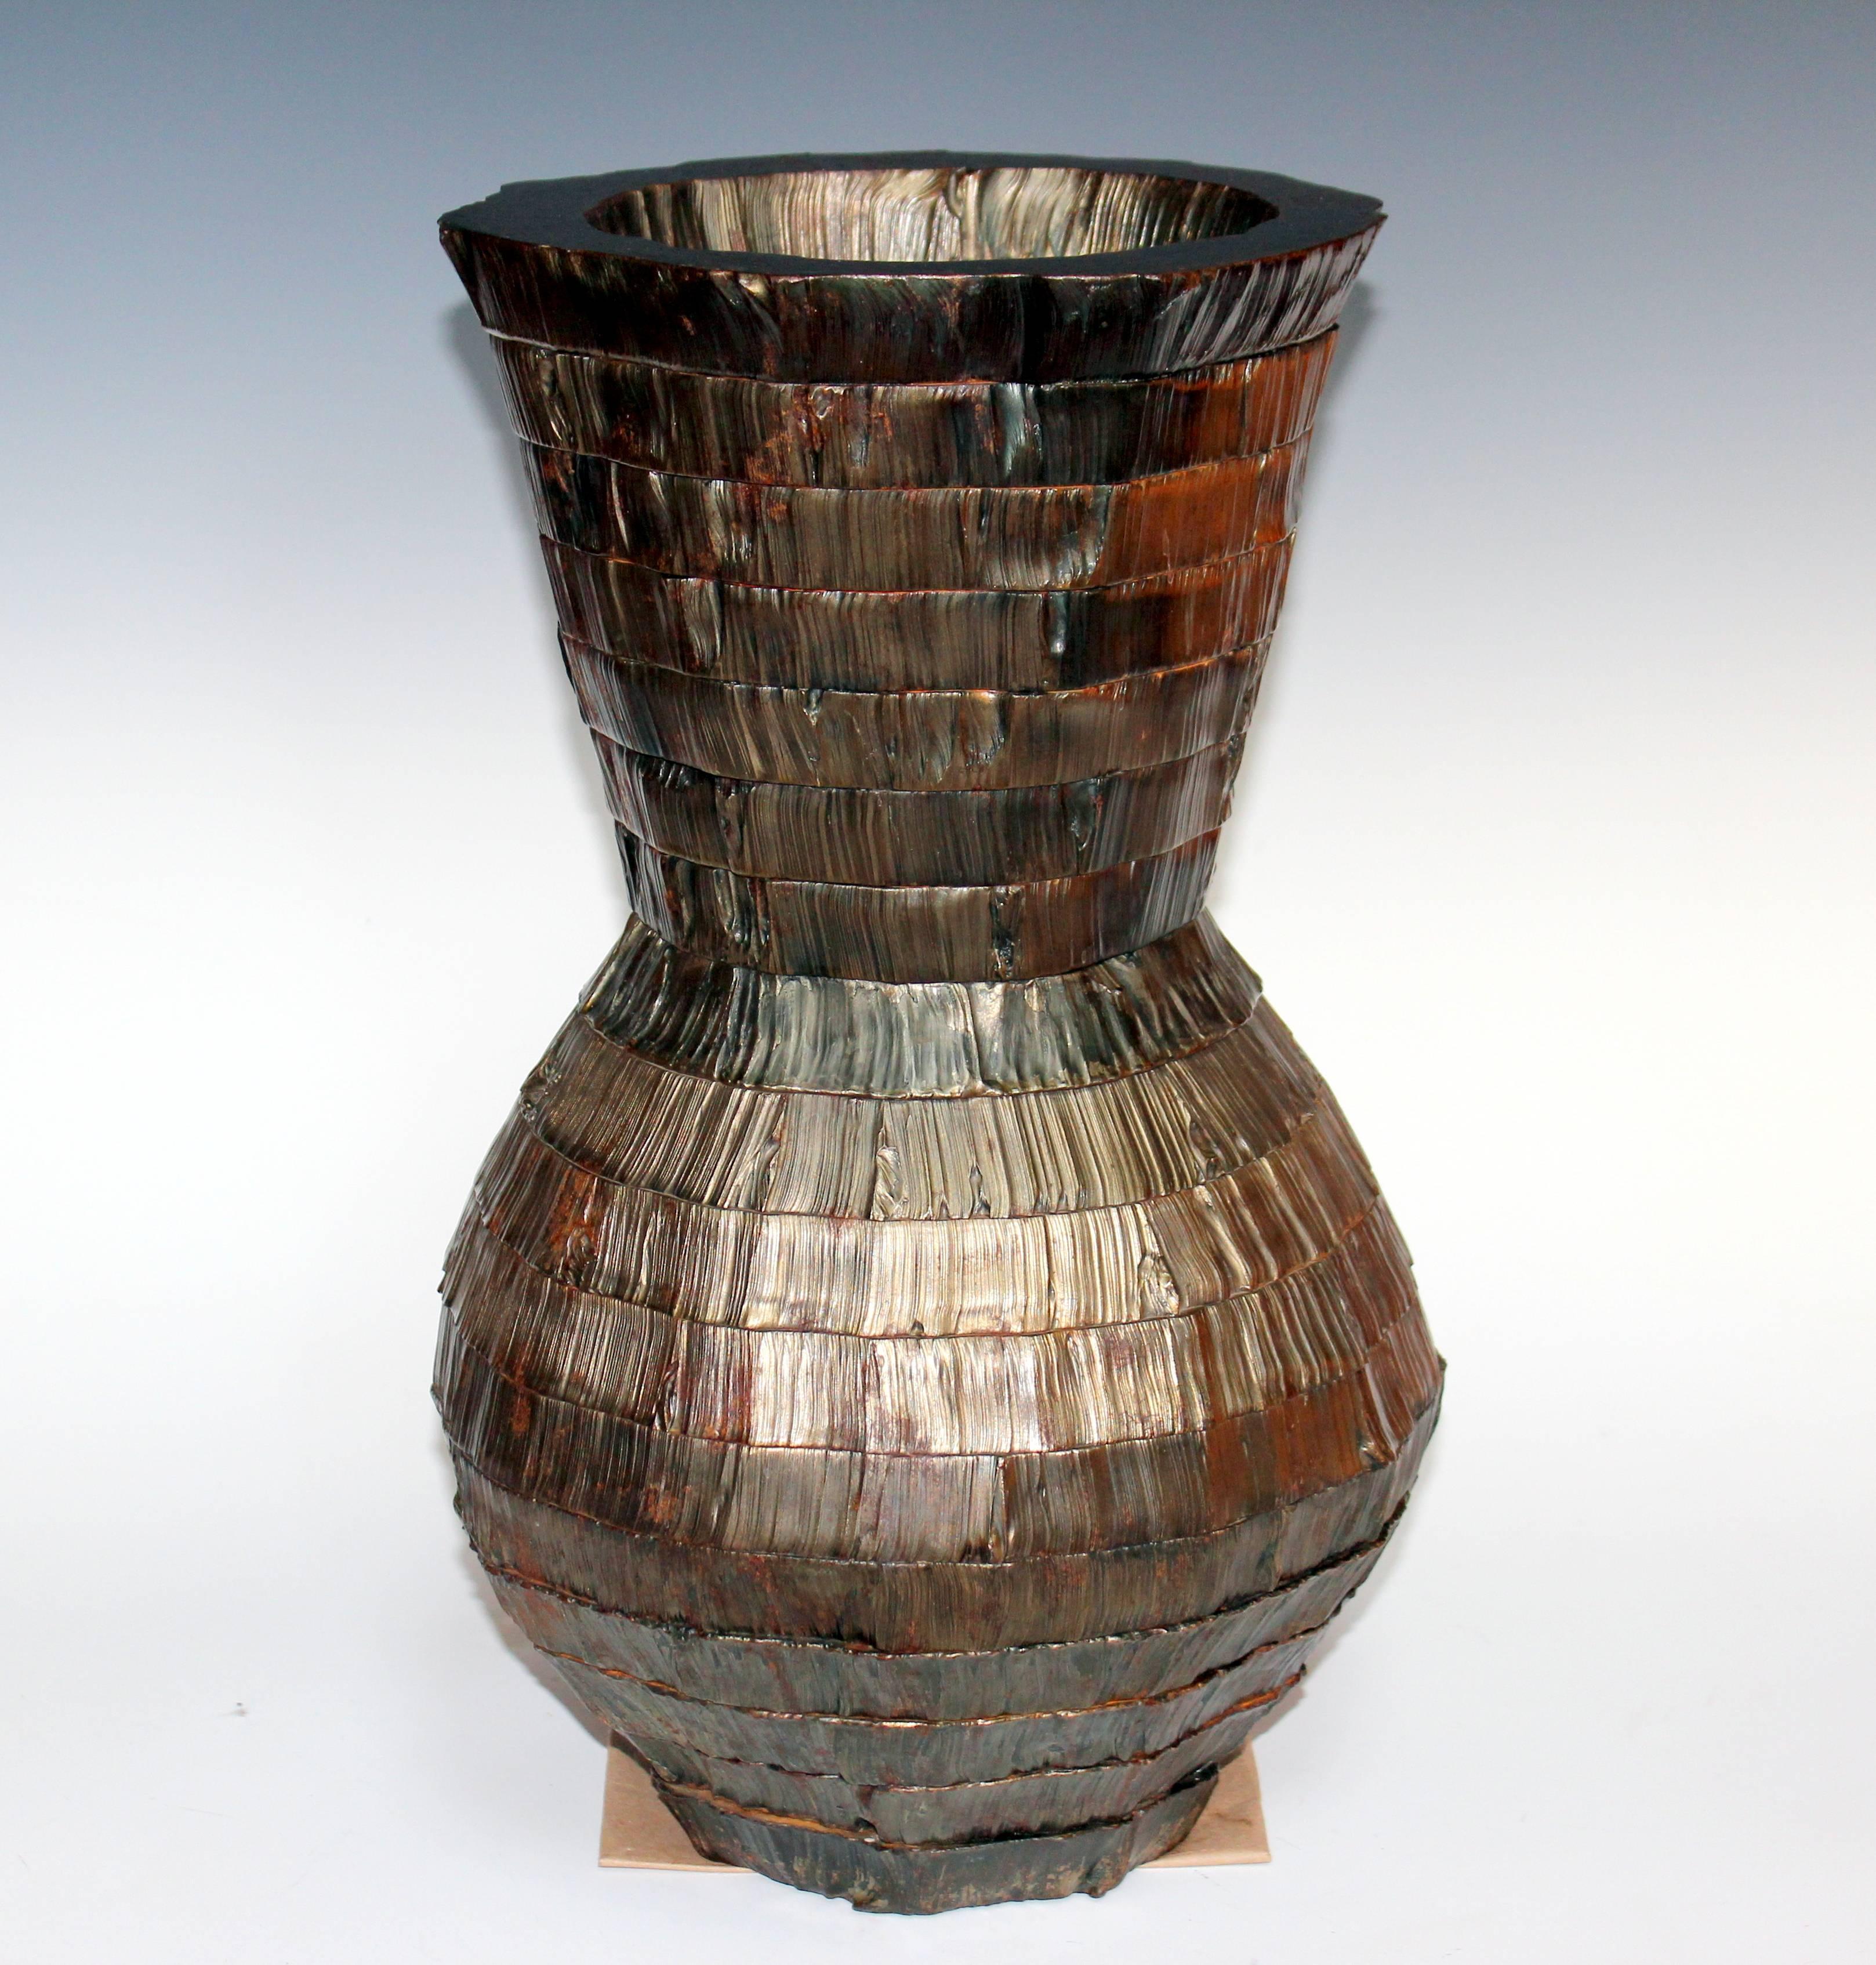 Stark cut steel vase by sculptor Ernest Shaw. Assembled and forged from individually cut bands of steel up to an inch and a half thick with a tree bark texture. Organic and strong. 17